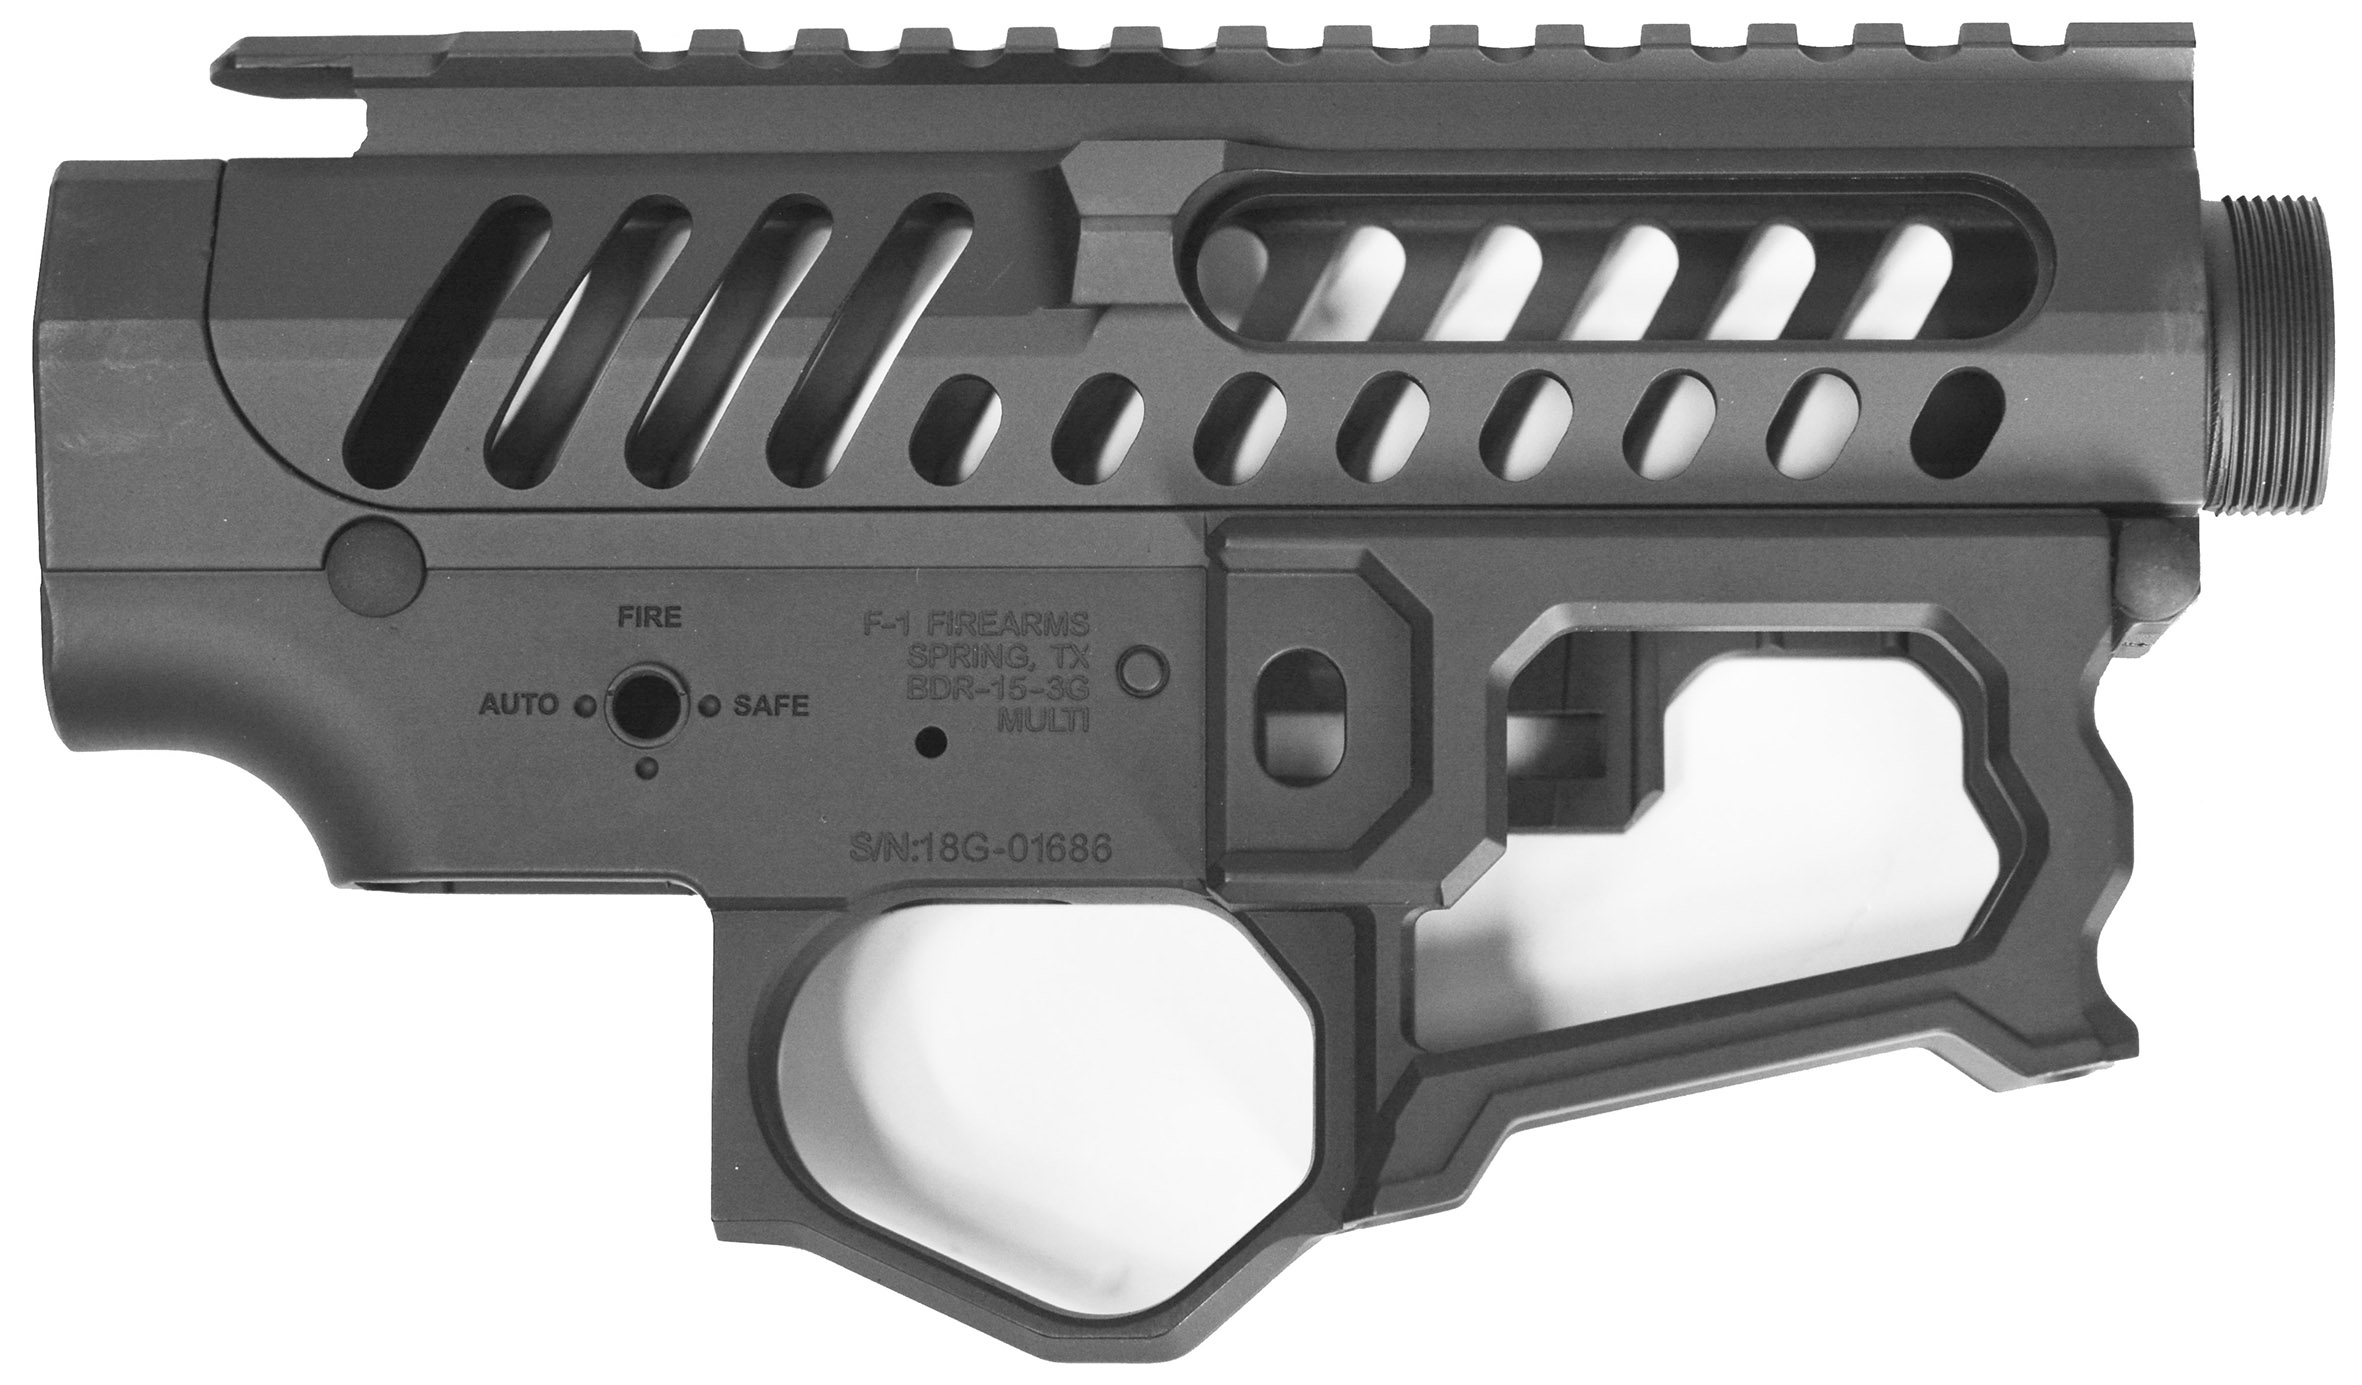 F1 Firearms BDR-15-3G Upper and Lower Receiver